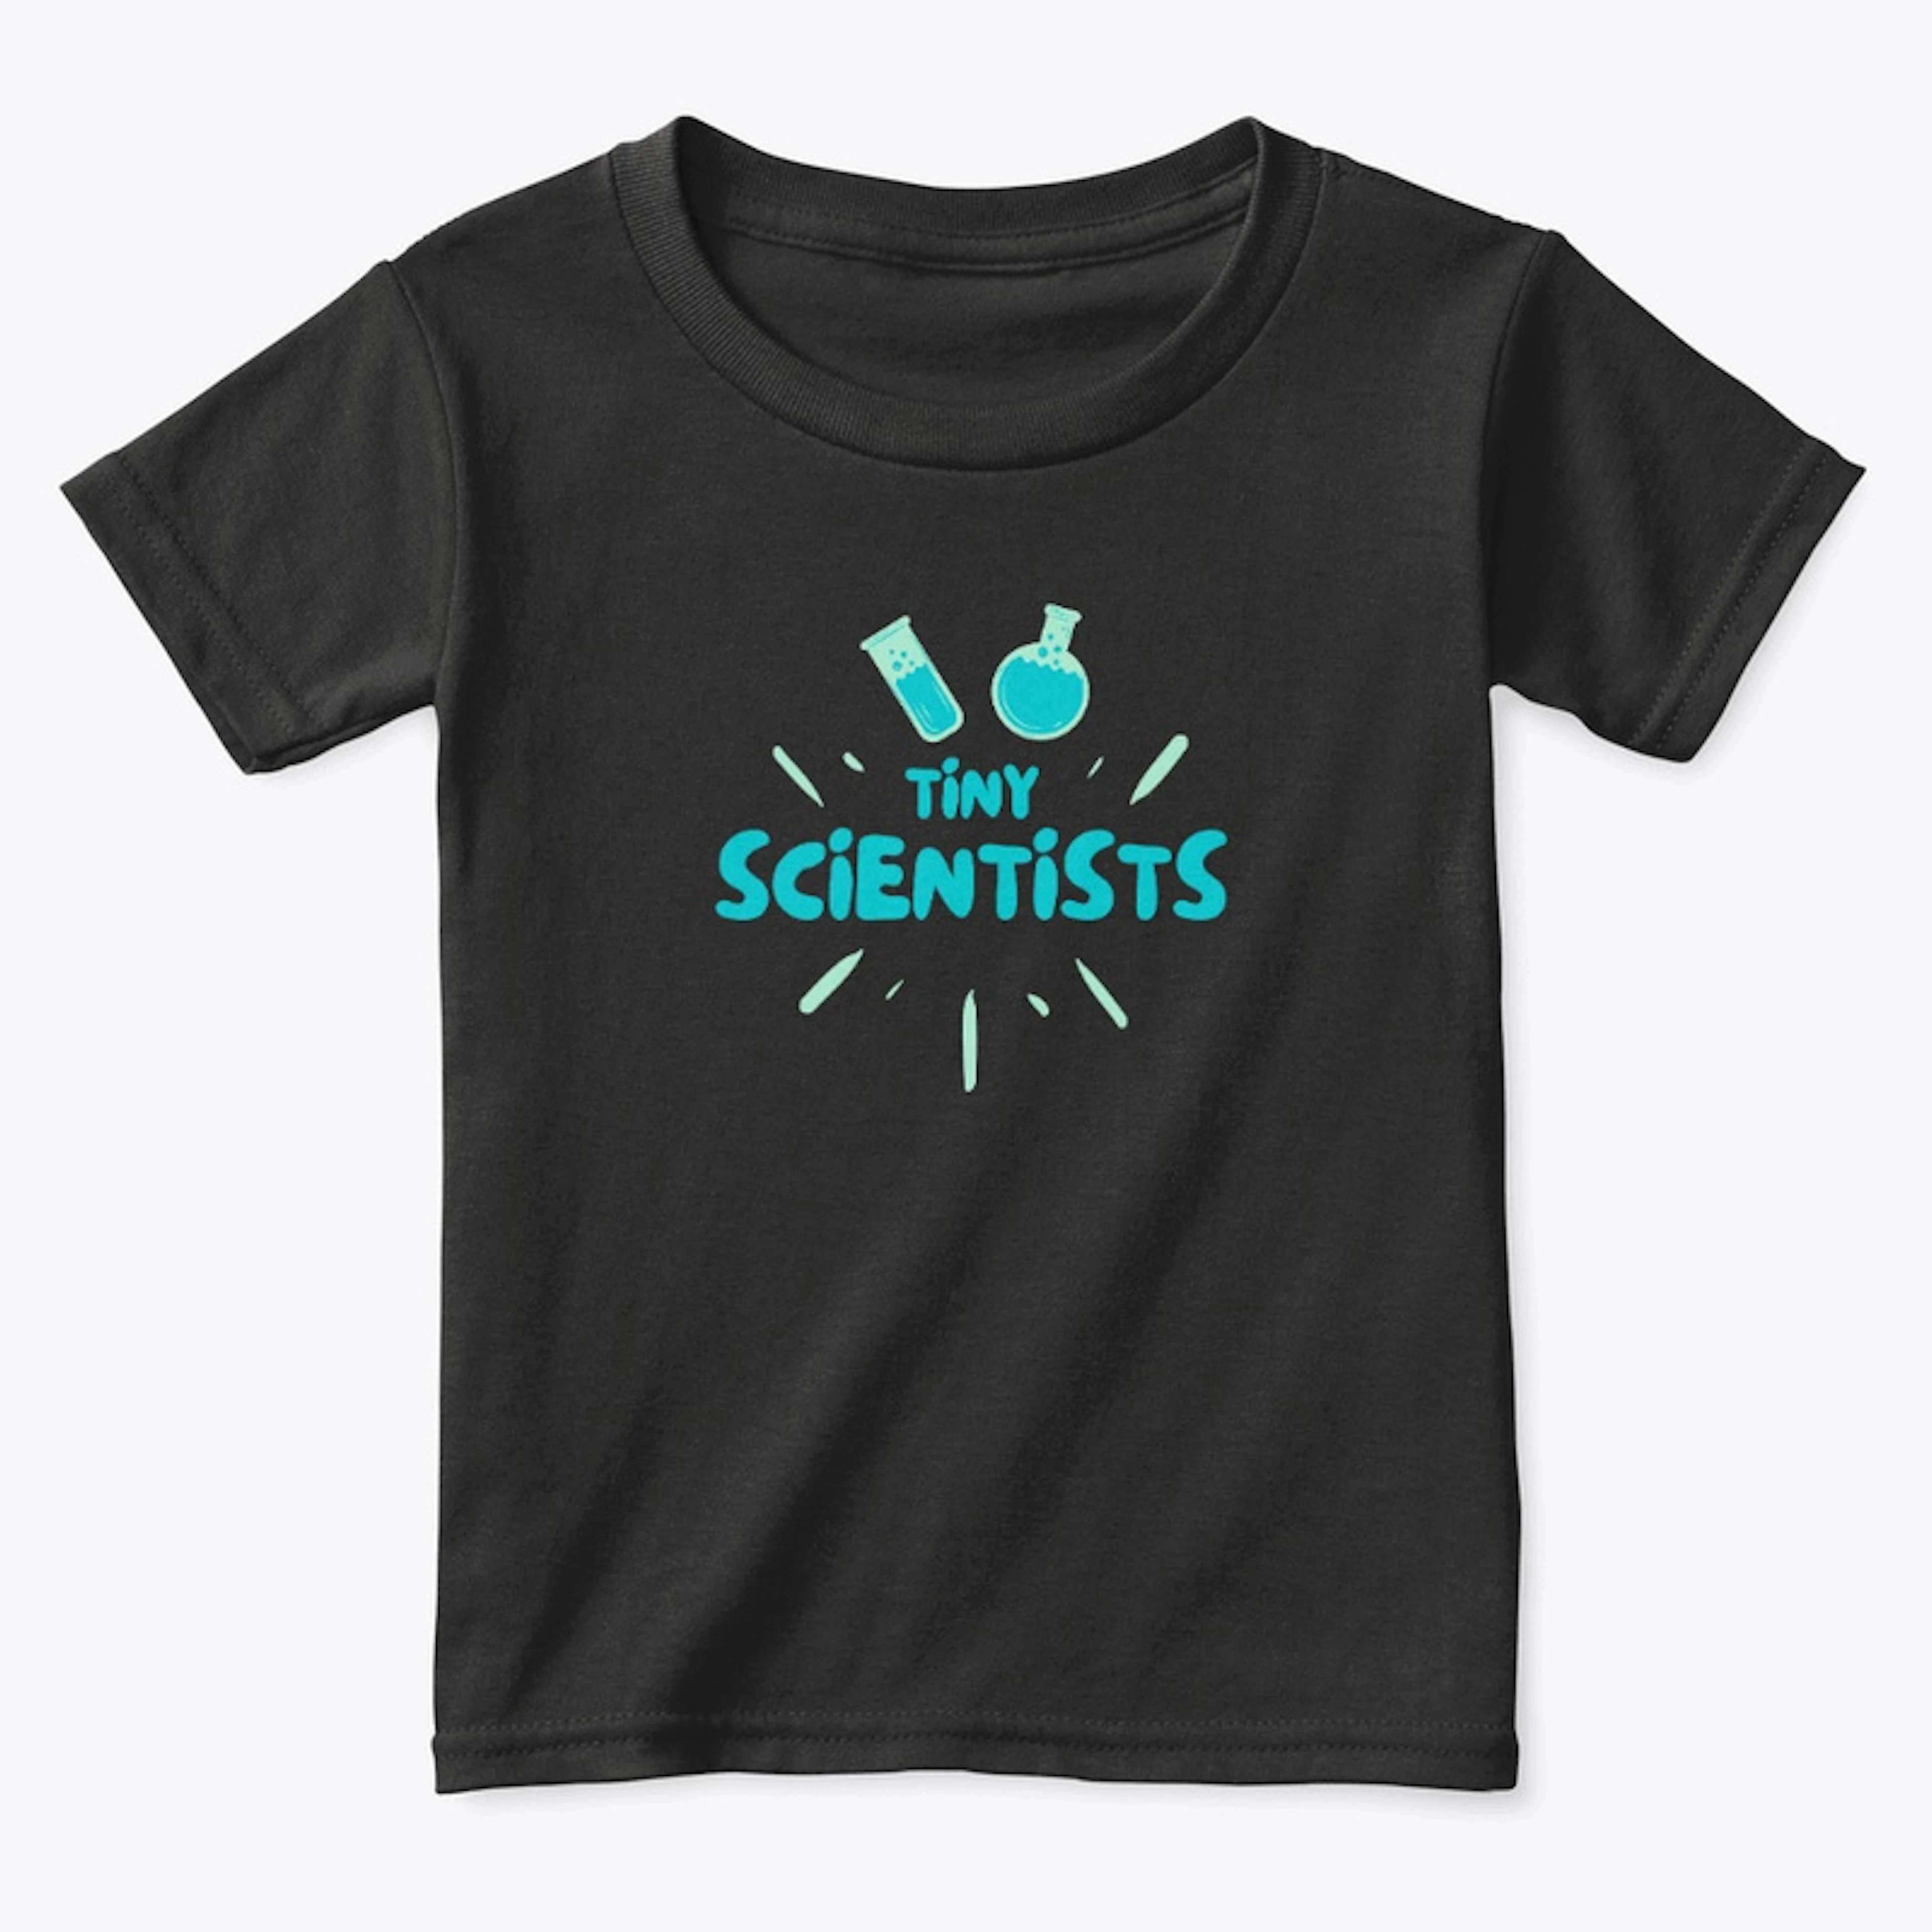 Beautiful T shirt Design For Toddlers!!!